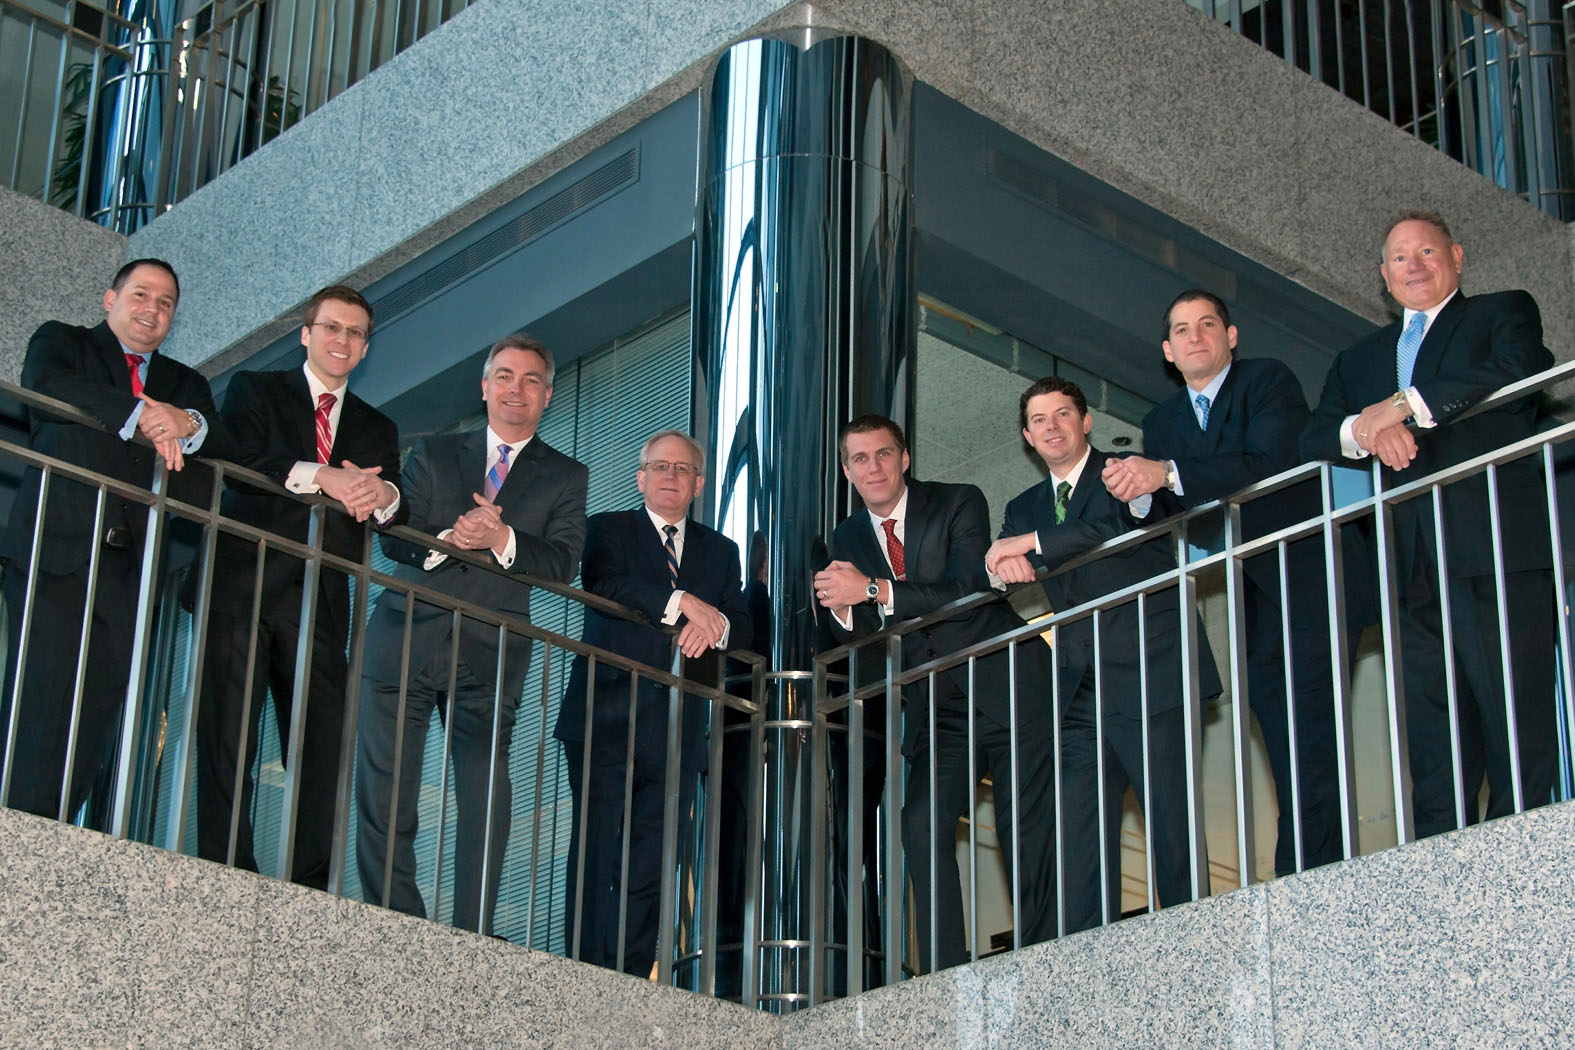 Four Seasons Wealth Management St. Louis, MO-based principals, pictured from left to right: Bill Kallaos, Jr., Travis Freeman, Kevin Grelle, Dale Terrell, Danton Troyer, Tim Banks, Daniel Klein and St